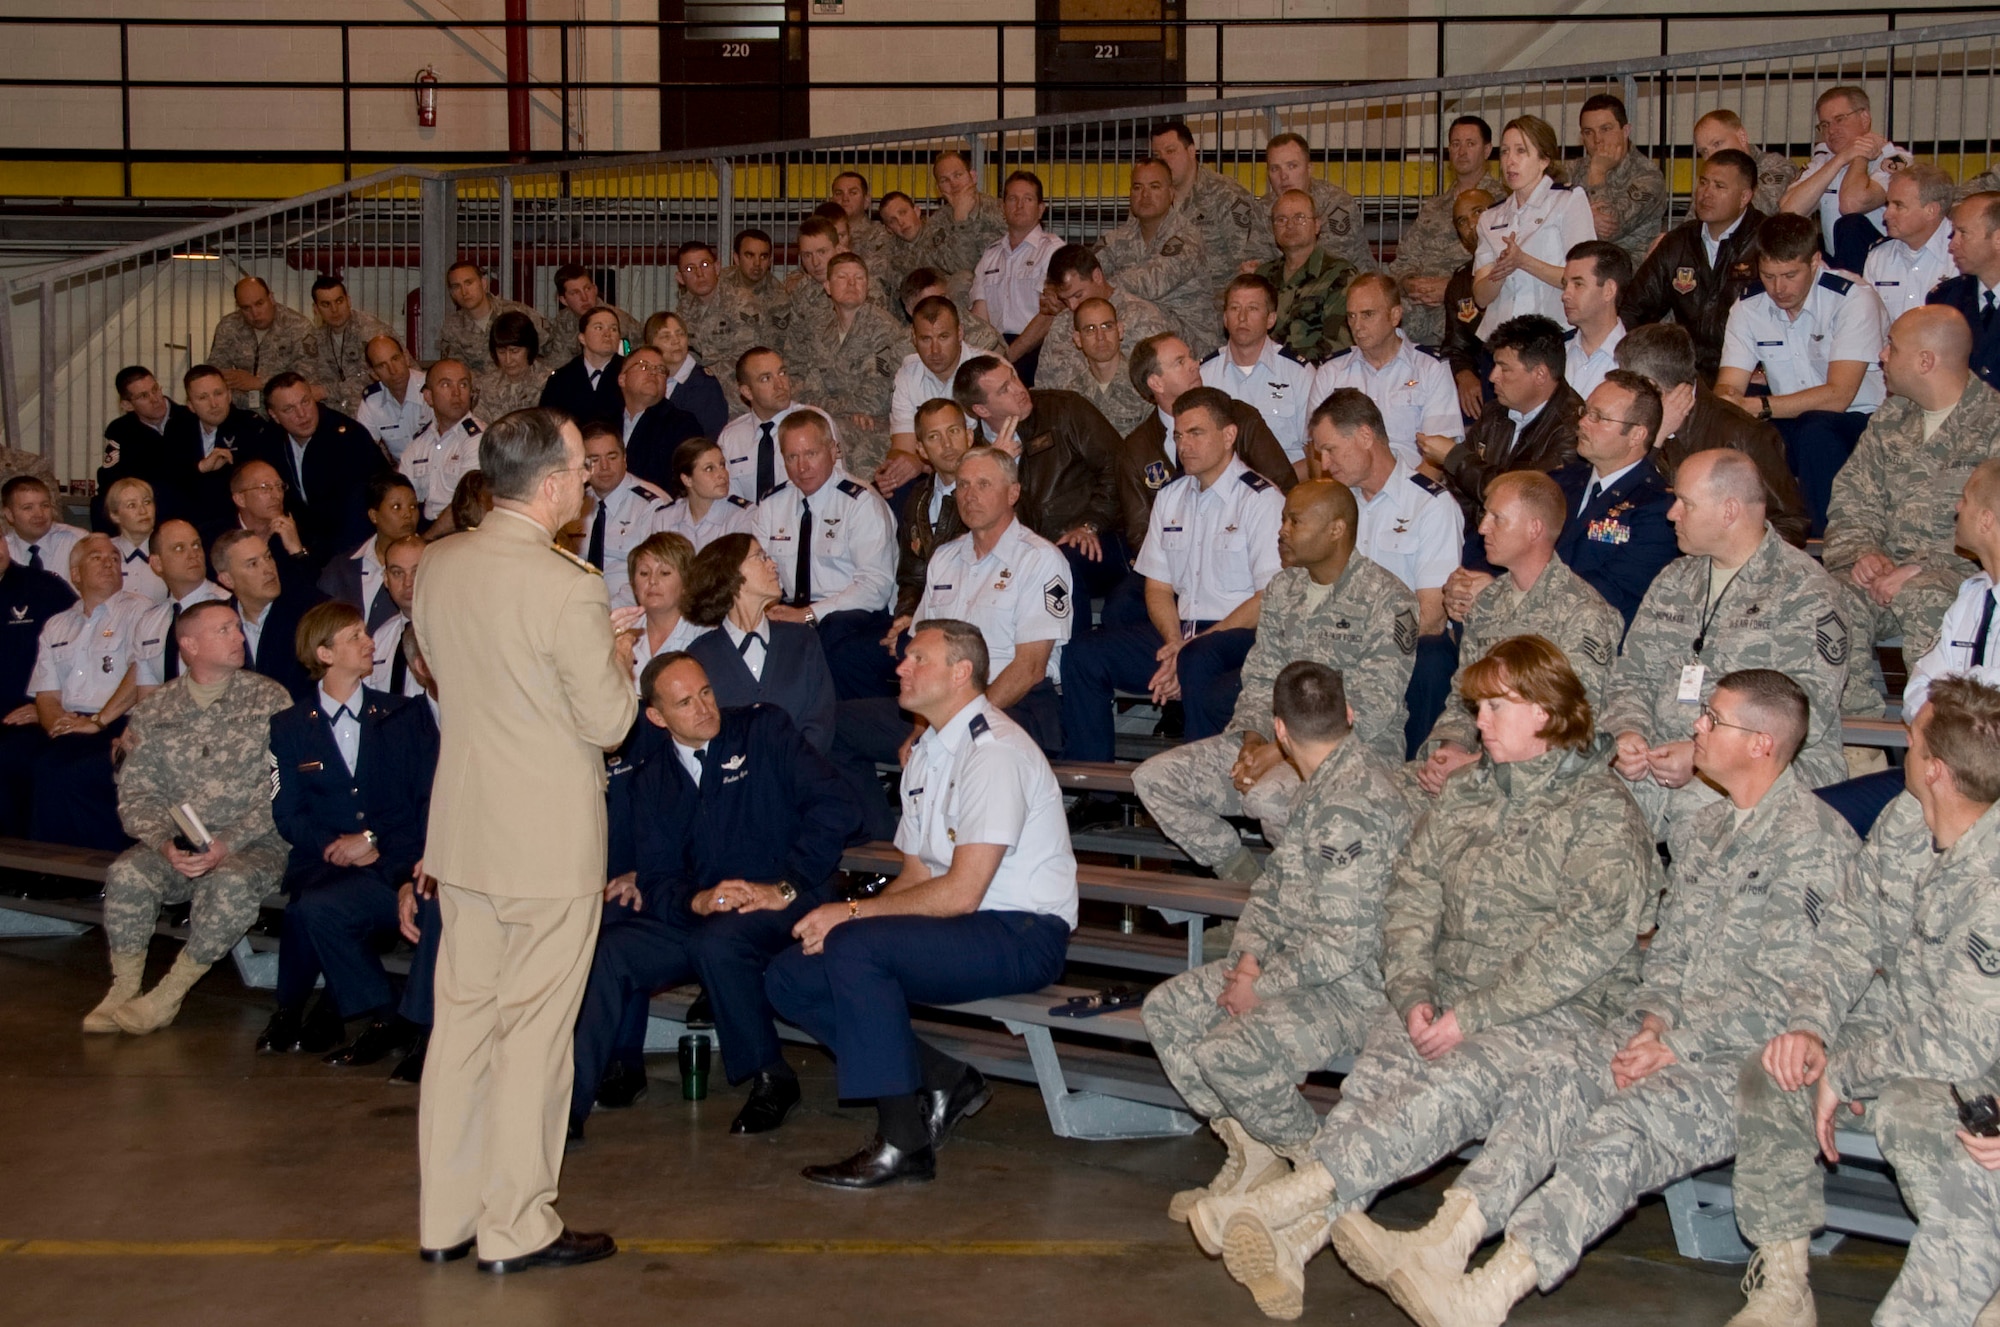 Admiral Mike Mullen, Chairman of the Joint Chiefs of Staff, conducted a Town Hall meeting with members of the 140th Wing, Colorado Air National Guard Monday.  During the meeting, members of the Air National Guard posed questions concerning the future of the Guard.  Picture here, Lt. Col. Gina Simonson, 140th Wing Staff Judge Advocate, poses a question regarding plans to include Title 32 members in the post 9/11 G.I. Bill.  (U.S. Air Force Photo/SMSgt John Rohrer) ( RELEASED)